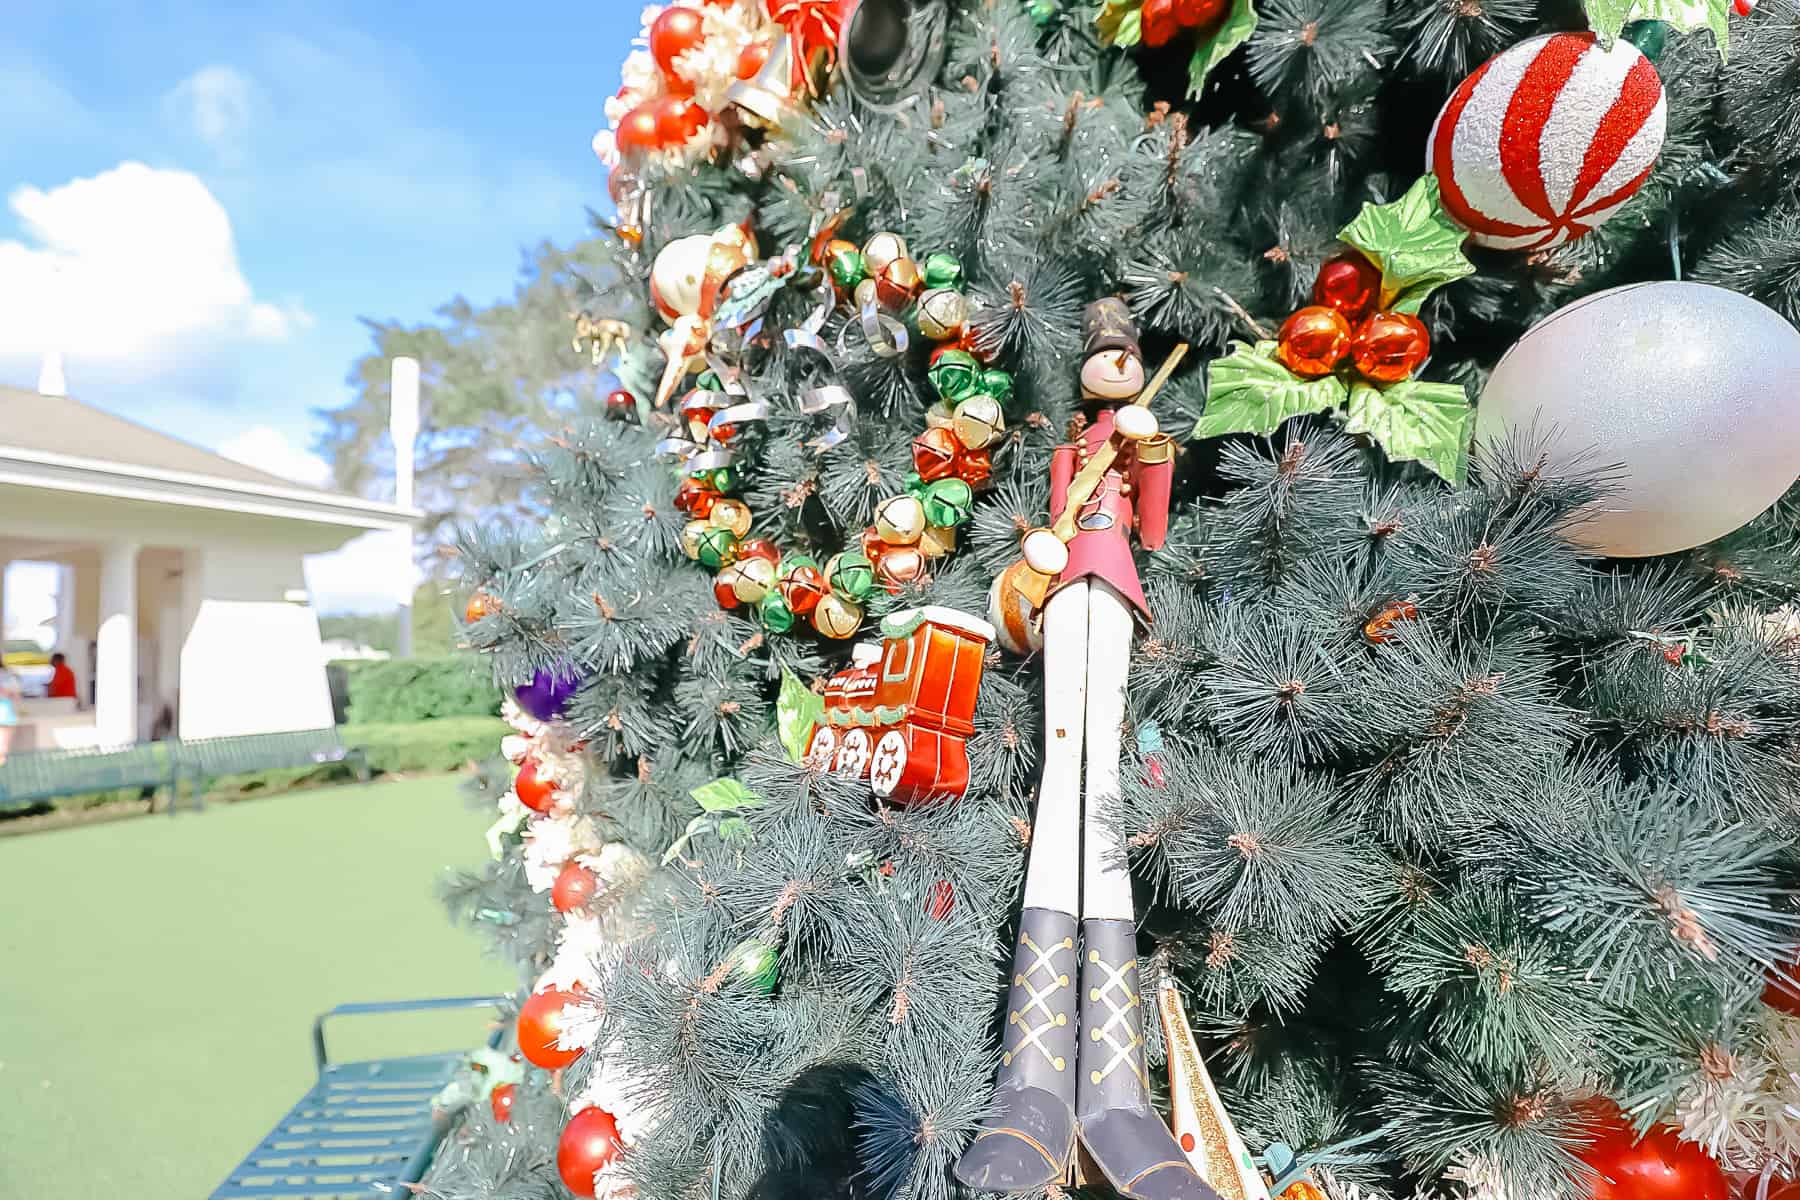 a large nutcracker ornament on the tree 